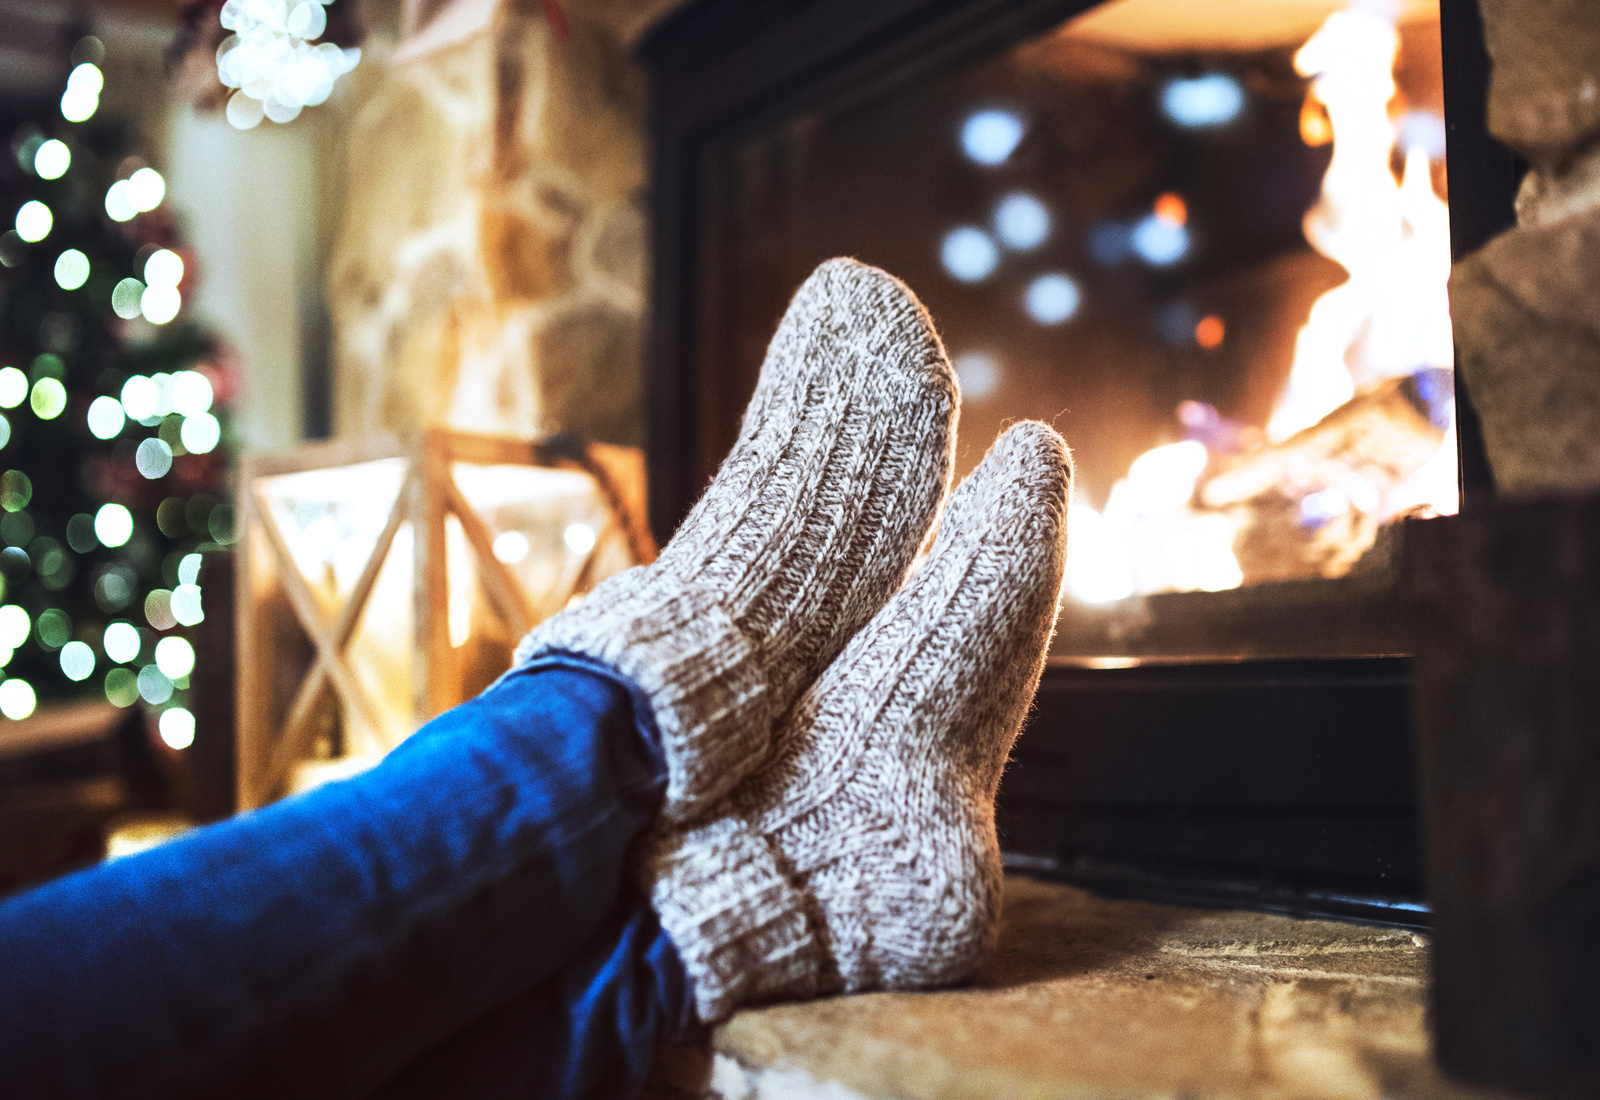 Are You a Master of General Knowledge? Take This True or False Quiz to Find Out Cosy warm socks fireplace